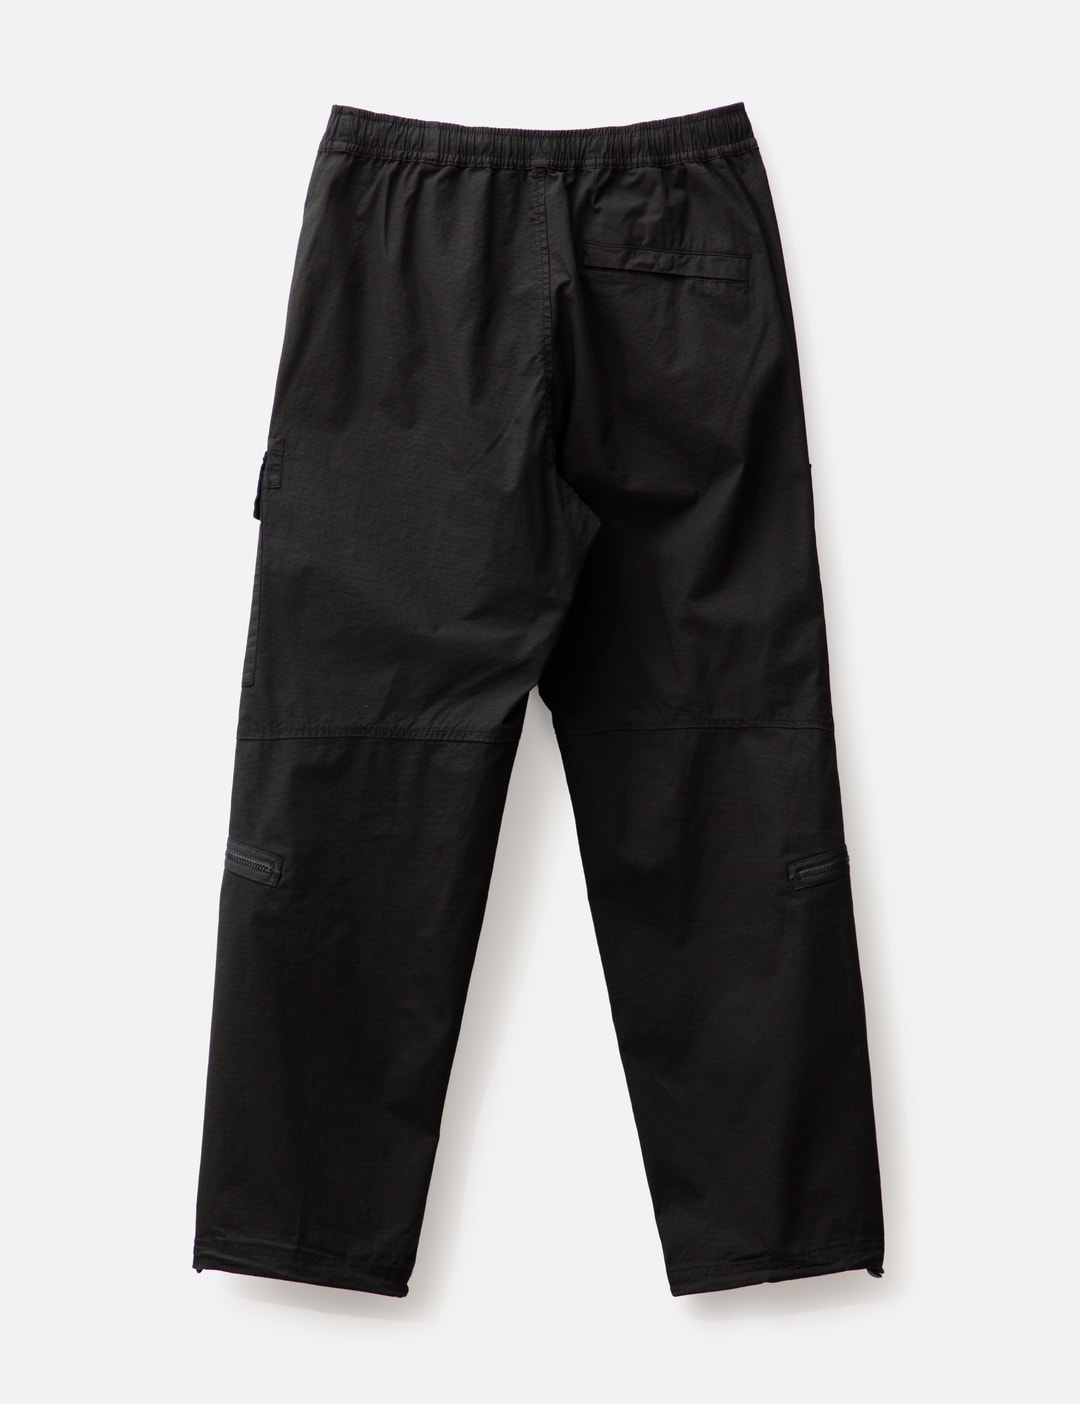 LOOSE FIT CARGO PANTS - 2